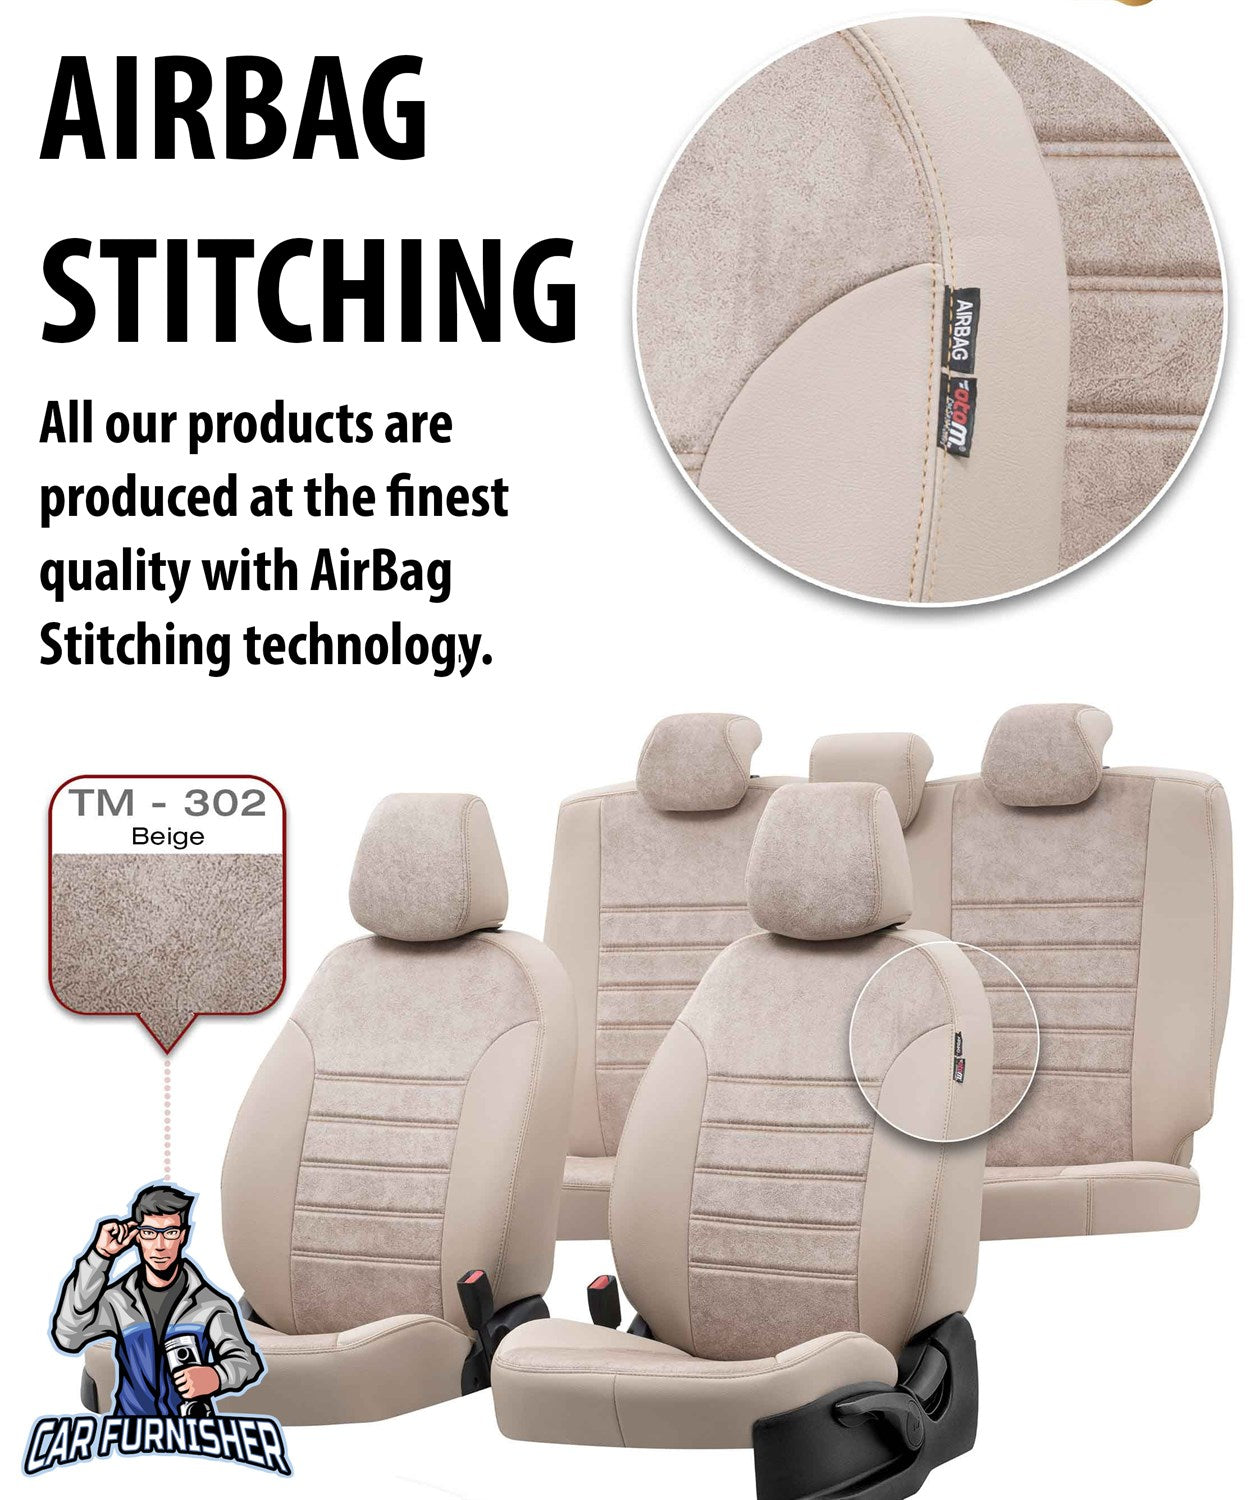 Mitsubishi L-200 Seat Covers Milano Suede Design Smoked Leather & Suede Fabric